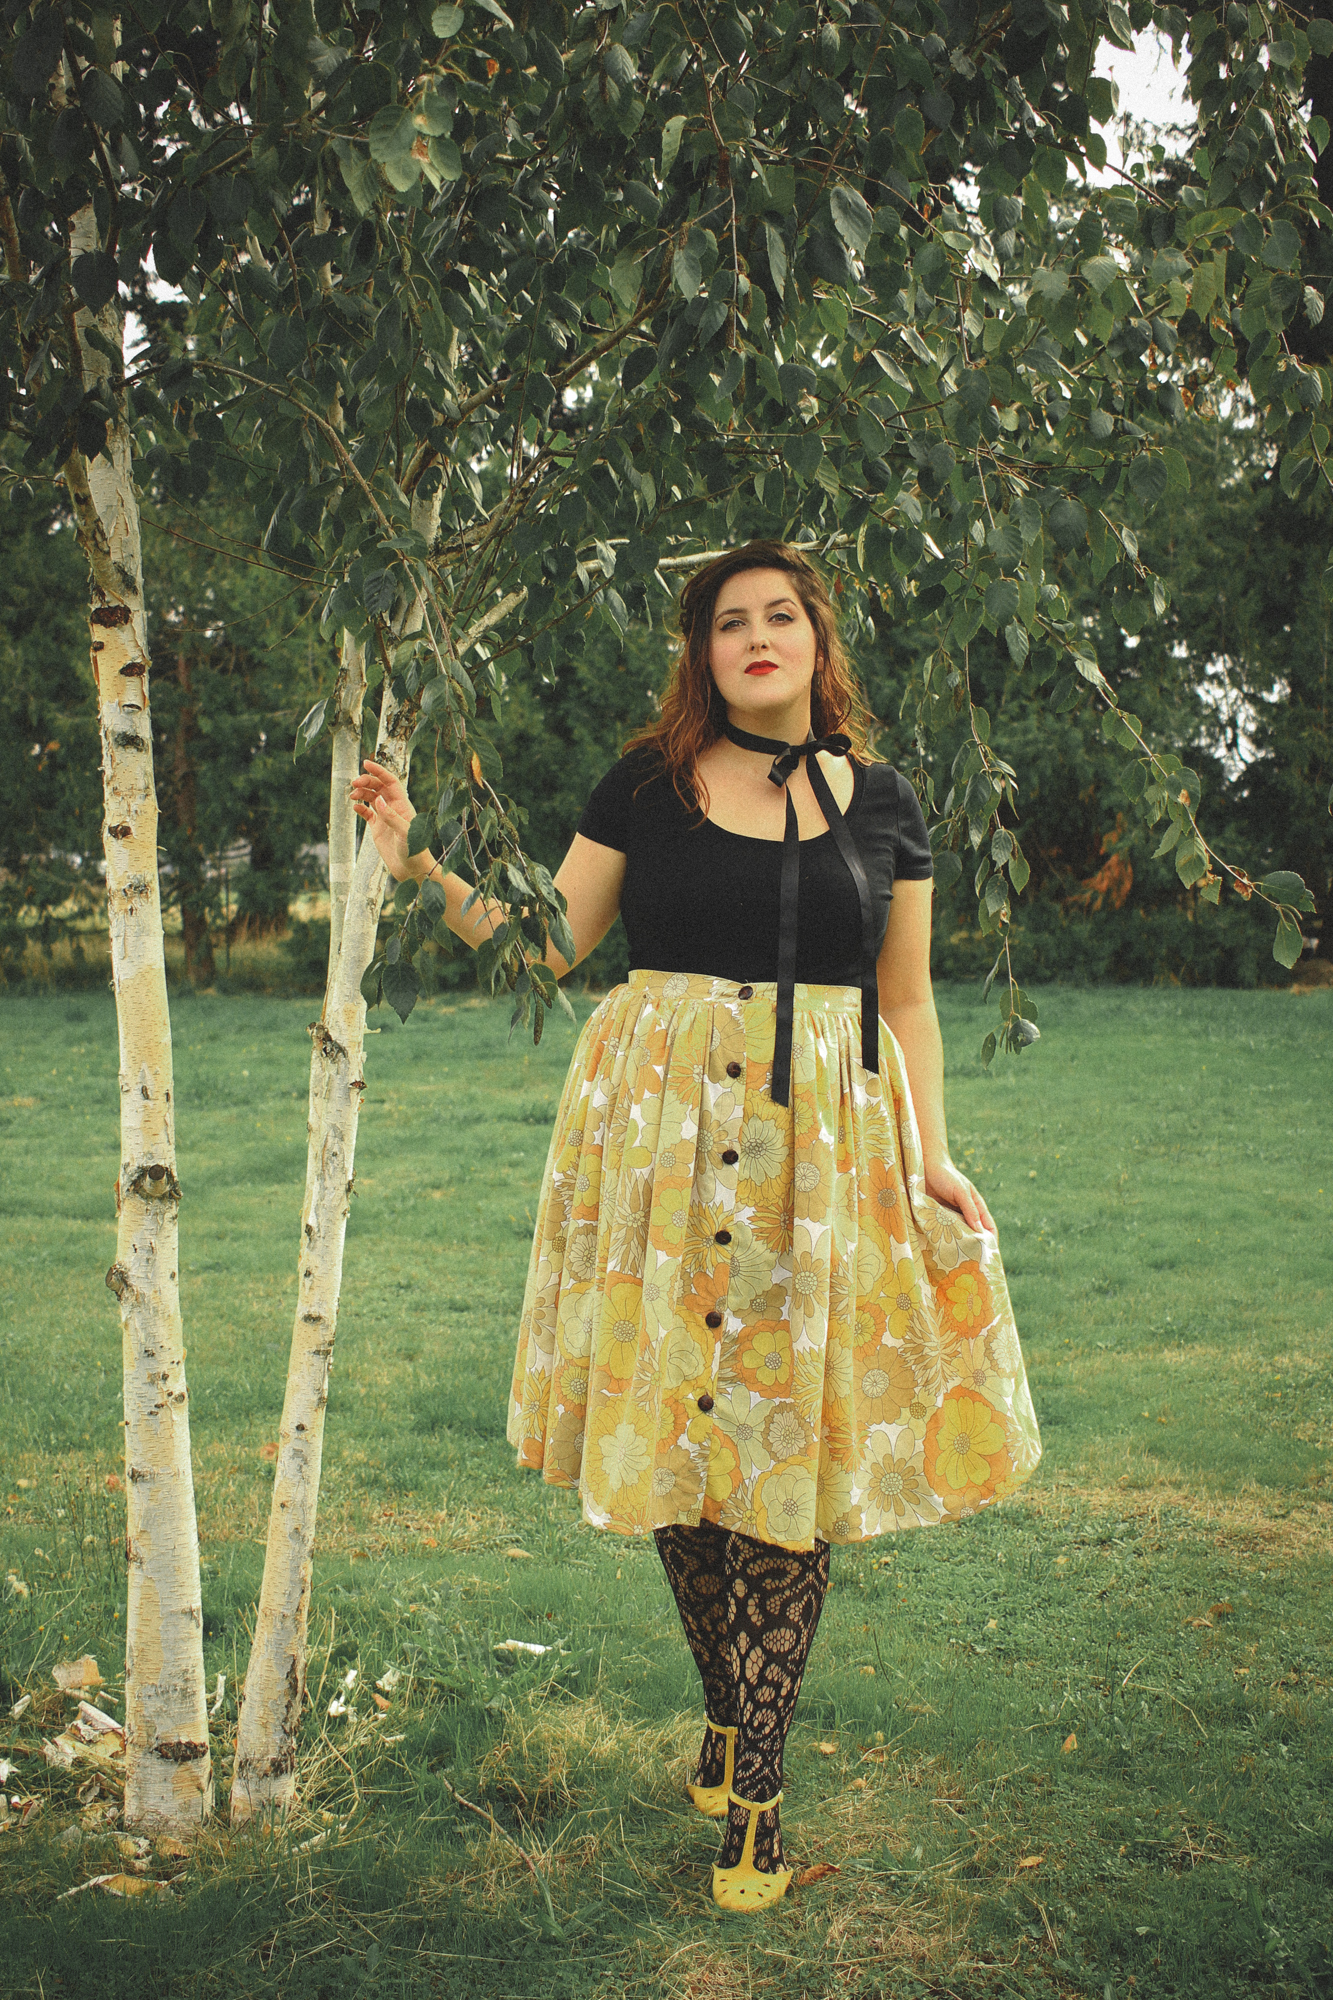 woman wearing a black top and a floral skirt in a vintage style